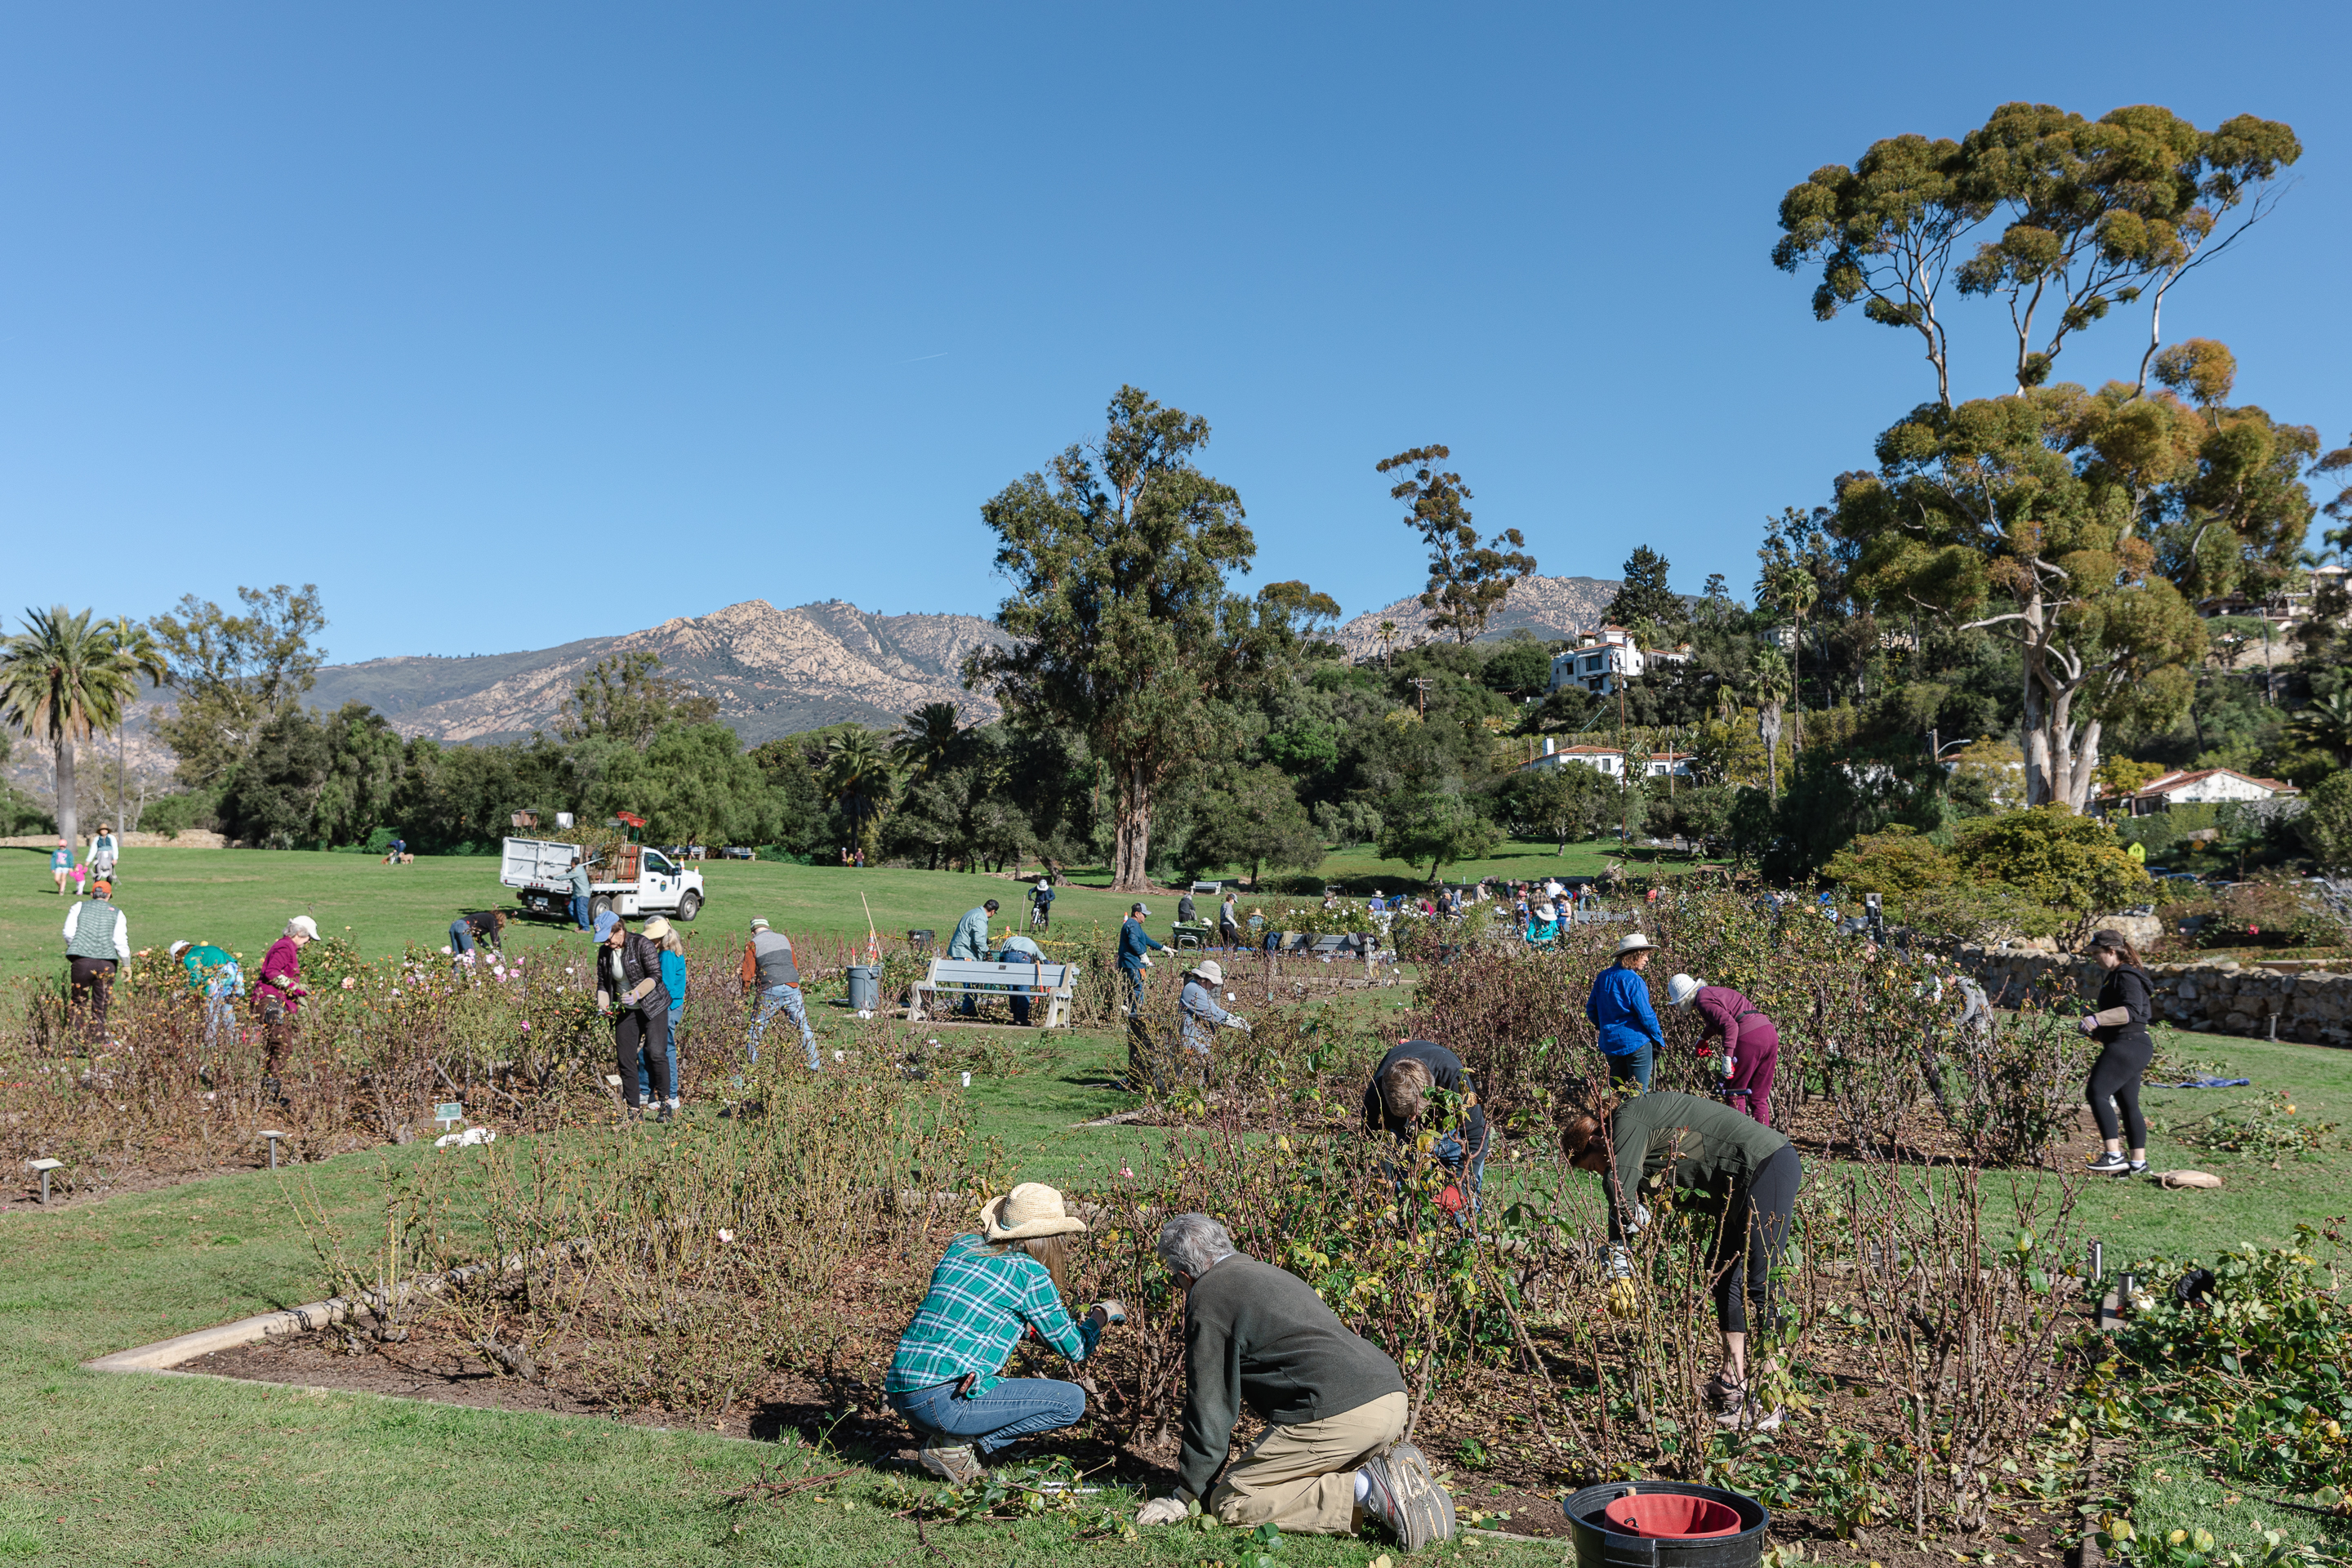 Volunteers working together to prune the rose garden at Mission Historical Park with a view of the mountains in the background.